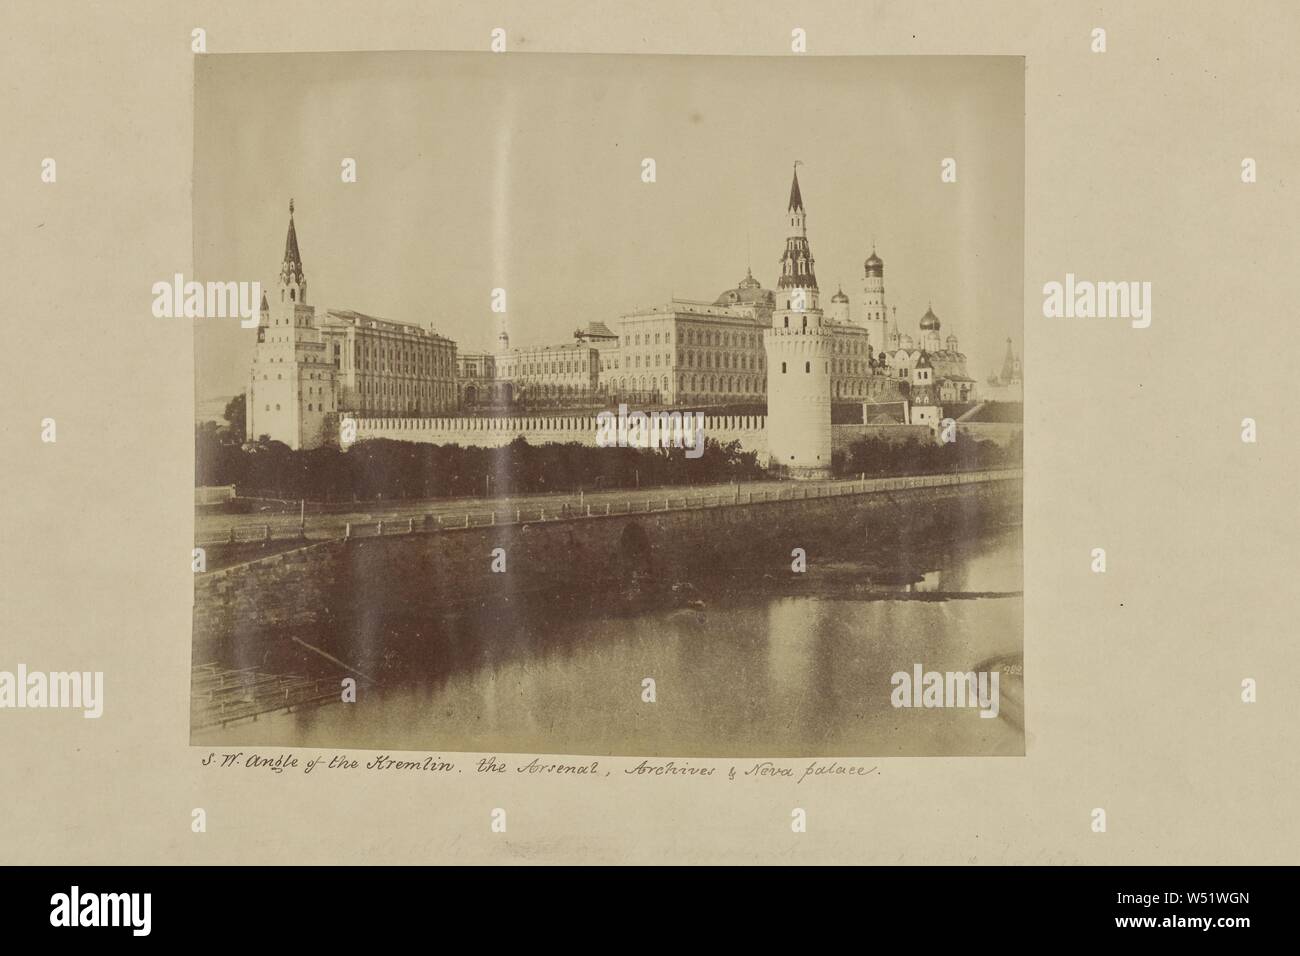 S.W. Angle of the Kremlin, the Arsenal, Archives & Neva Palace, Roger Fenton (English, 1819 - 1869), Moscow, Russia, September 1852, Albumenized salted paper print, 18.3 × 21.7 cm (7 3/16 × 8 9/16 in Stock Photo